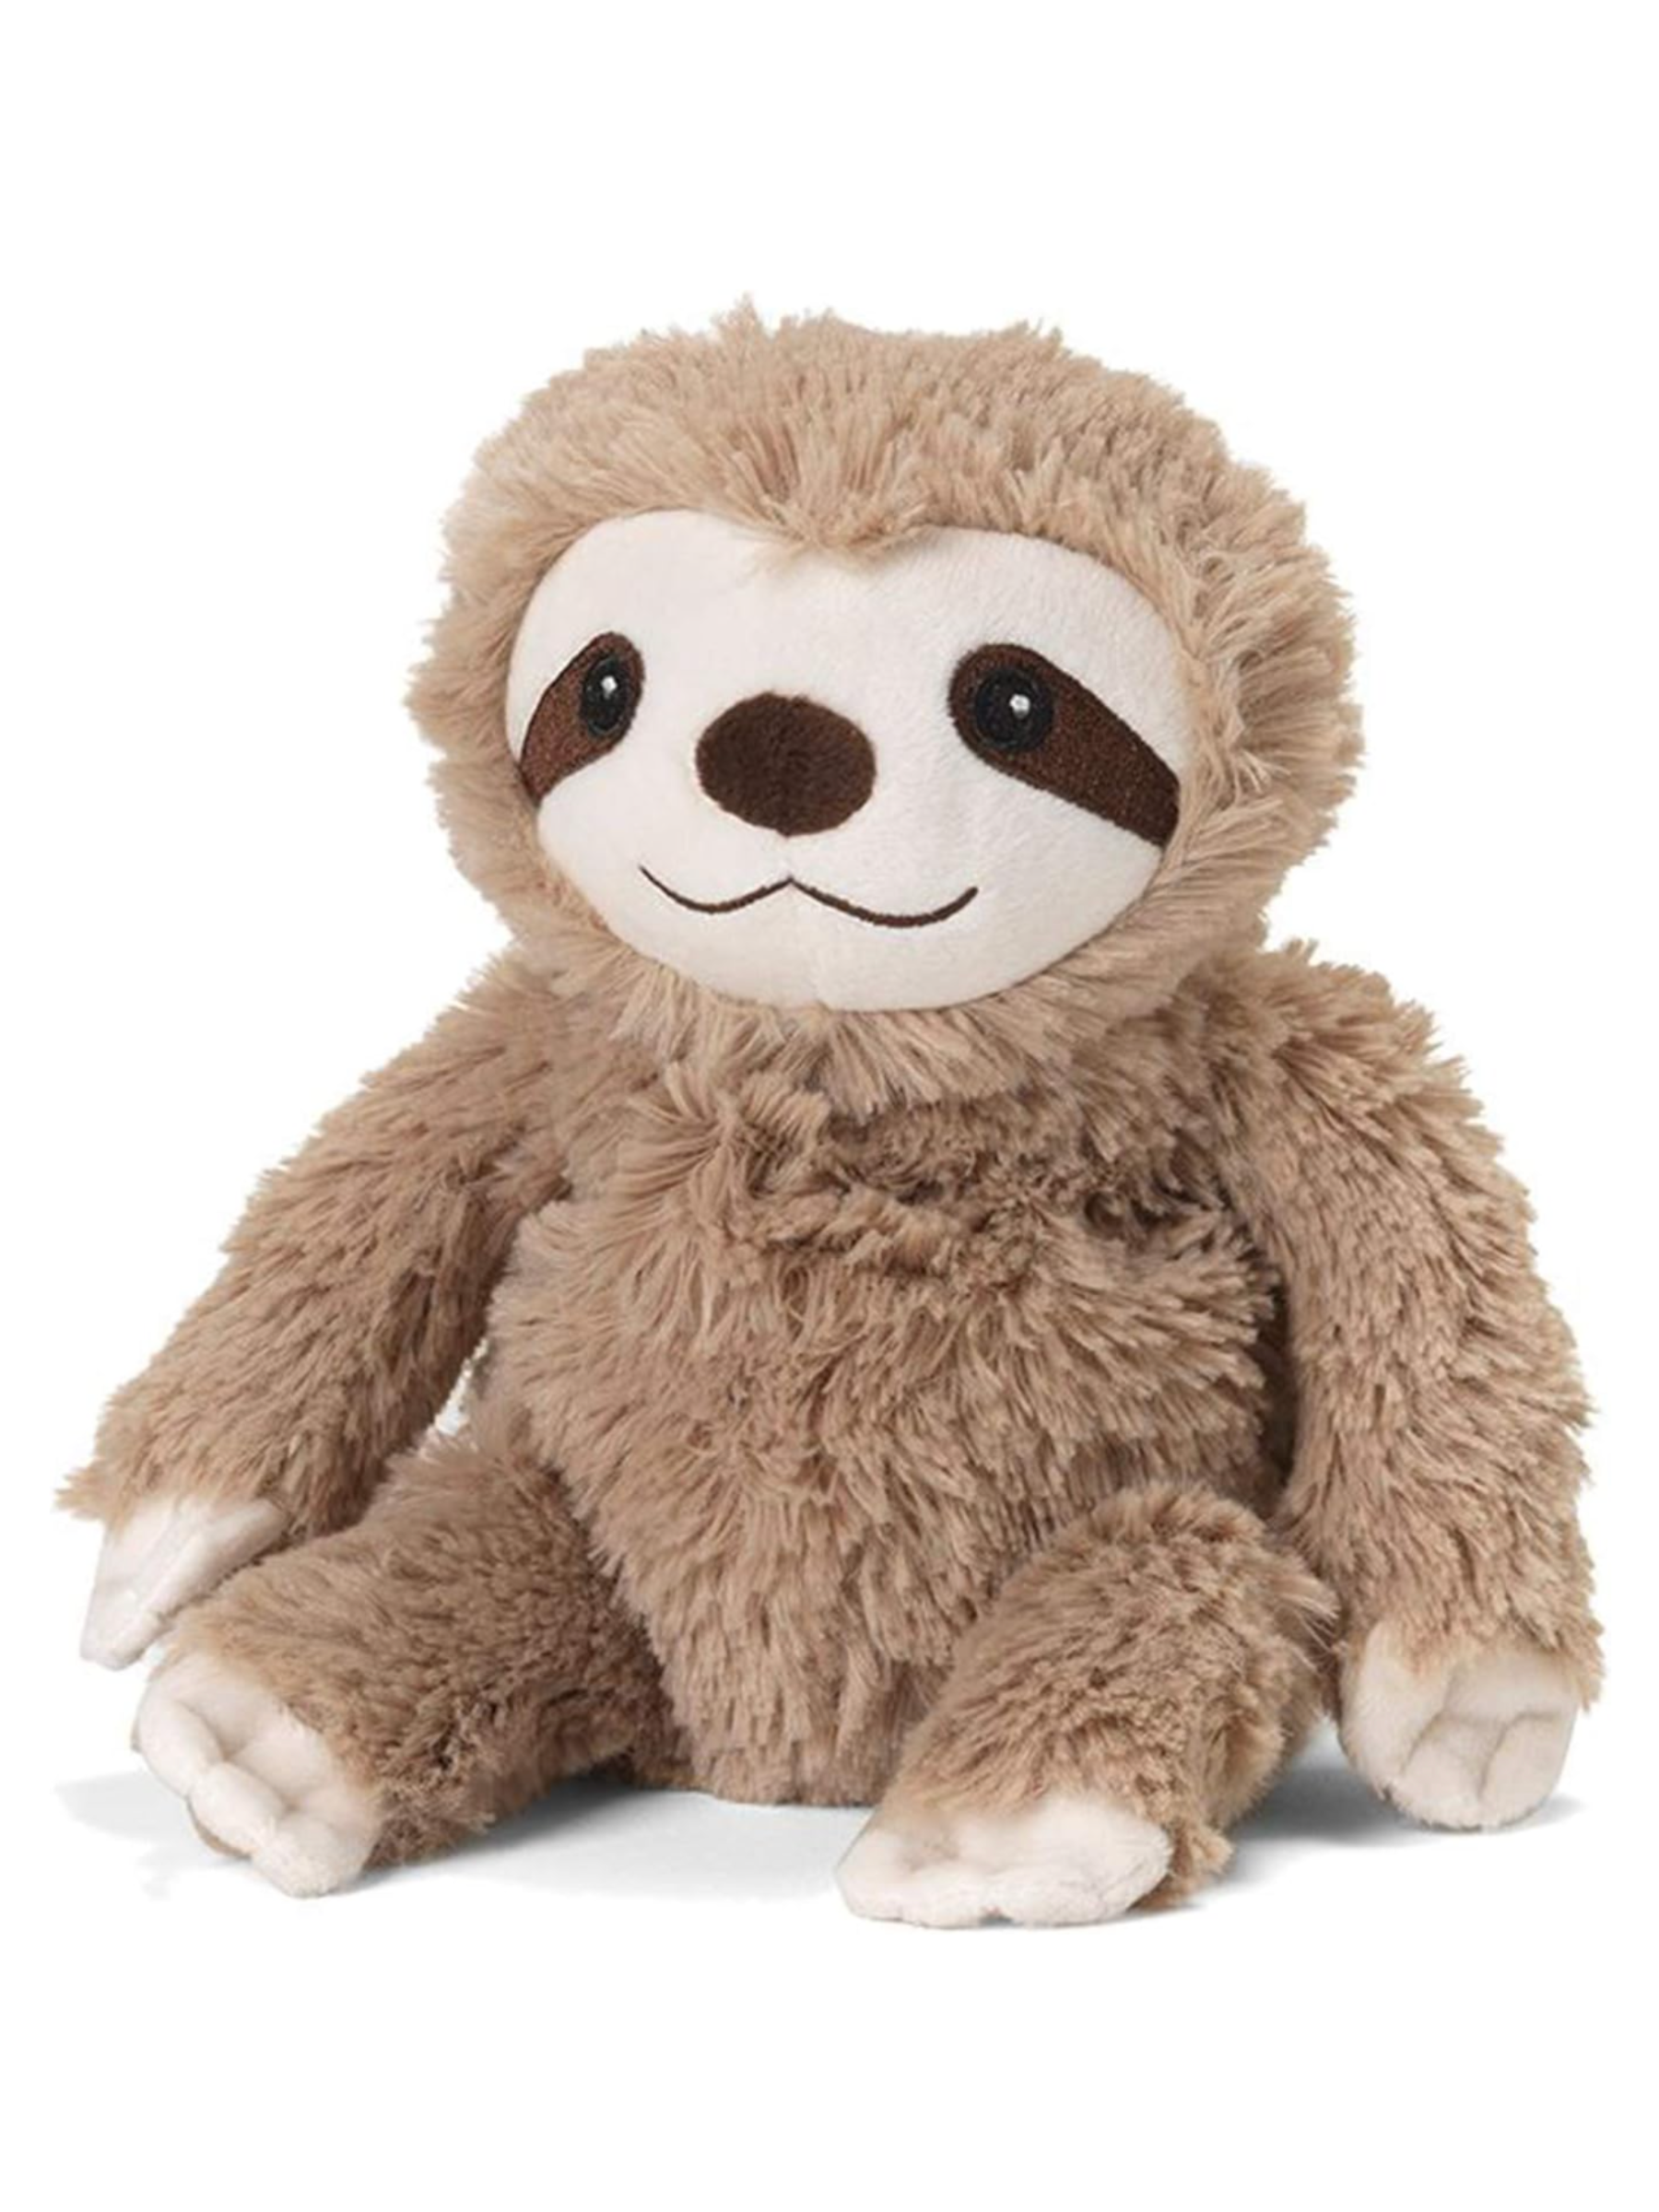 Homesickness is no match for this heatable stuffed animal that also smells like lavender. It’s almost as good as having a loved one or a pet nearby. $15, Amazon. <a href="https://www.amazon.com/Intelex-Warmies-Microwavable-Lavender-Scented/dp/B07VMHN22L/">Get it now!</a><p>Sign up for today’s biggest stories, from pop culture to politics.</p><a href="https://www.glamour.com/newsletter/news?sourceCode=msnsend">Sign Up</a>